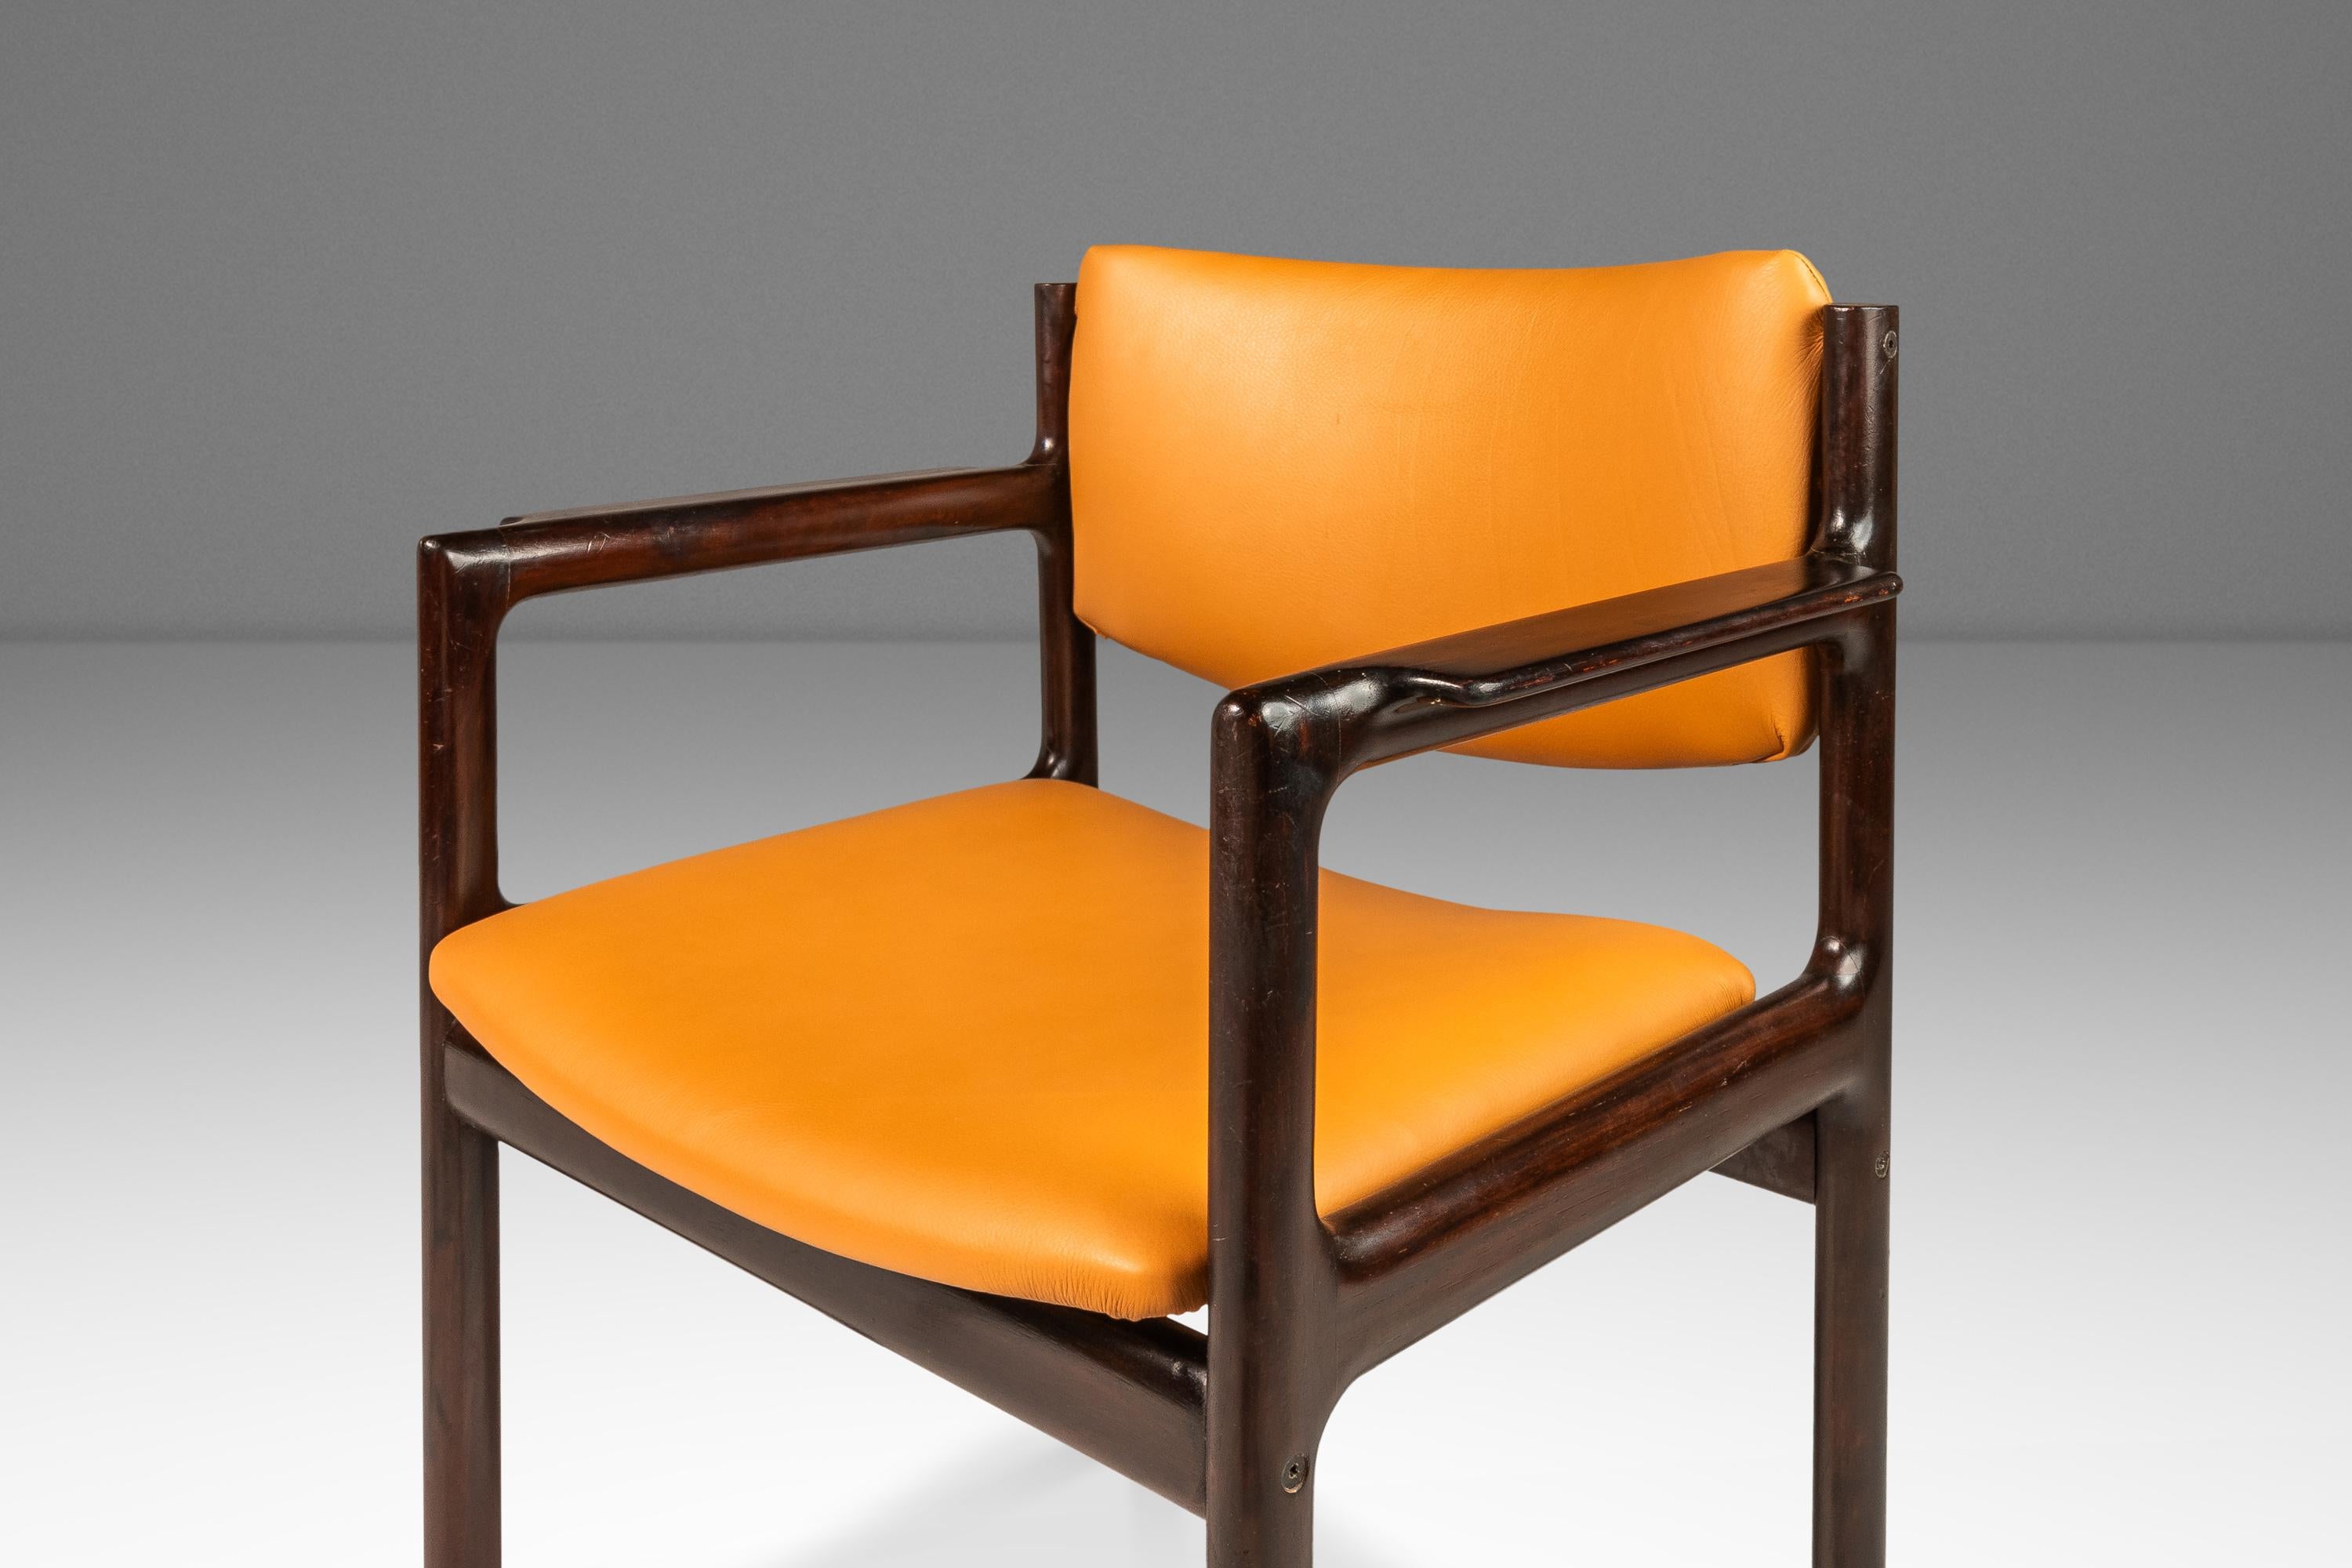 Set of 4 Mahogany Arm Chairs, Caramel Leather by Danish Overseas Imports, 1960's For Sale 11